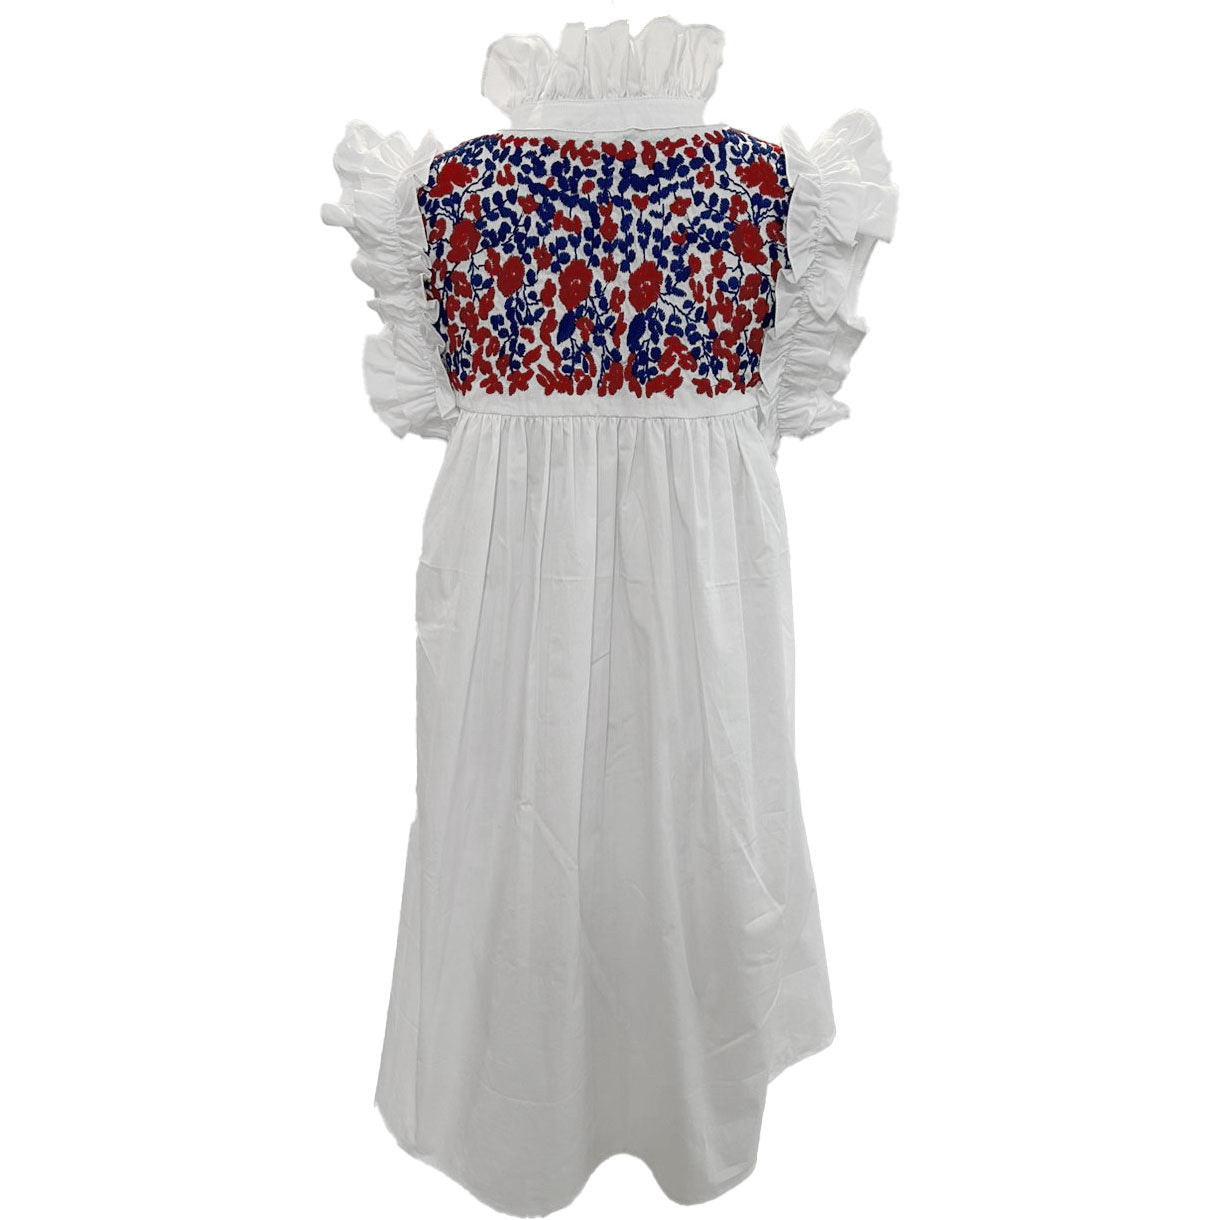 PRE-ORDER: Fourth of July White Hummingbird Dress (shipping first week of June)